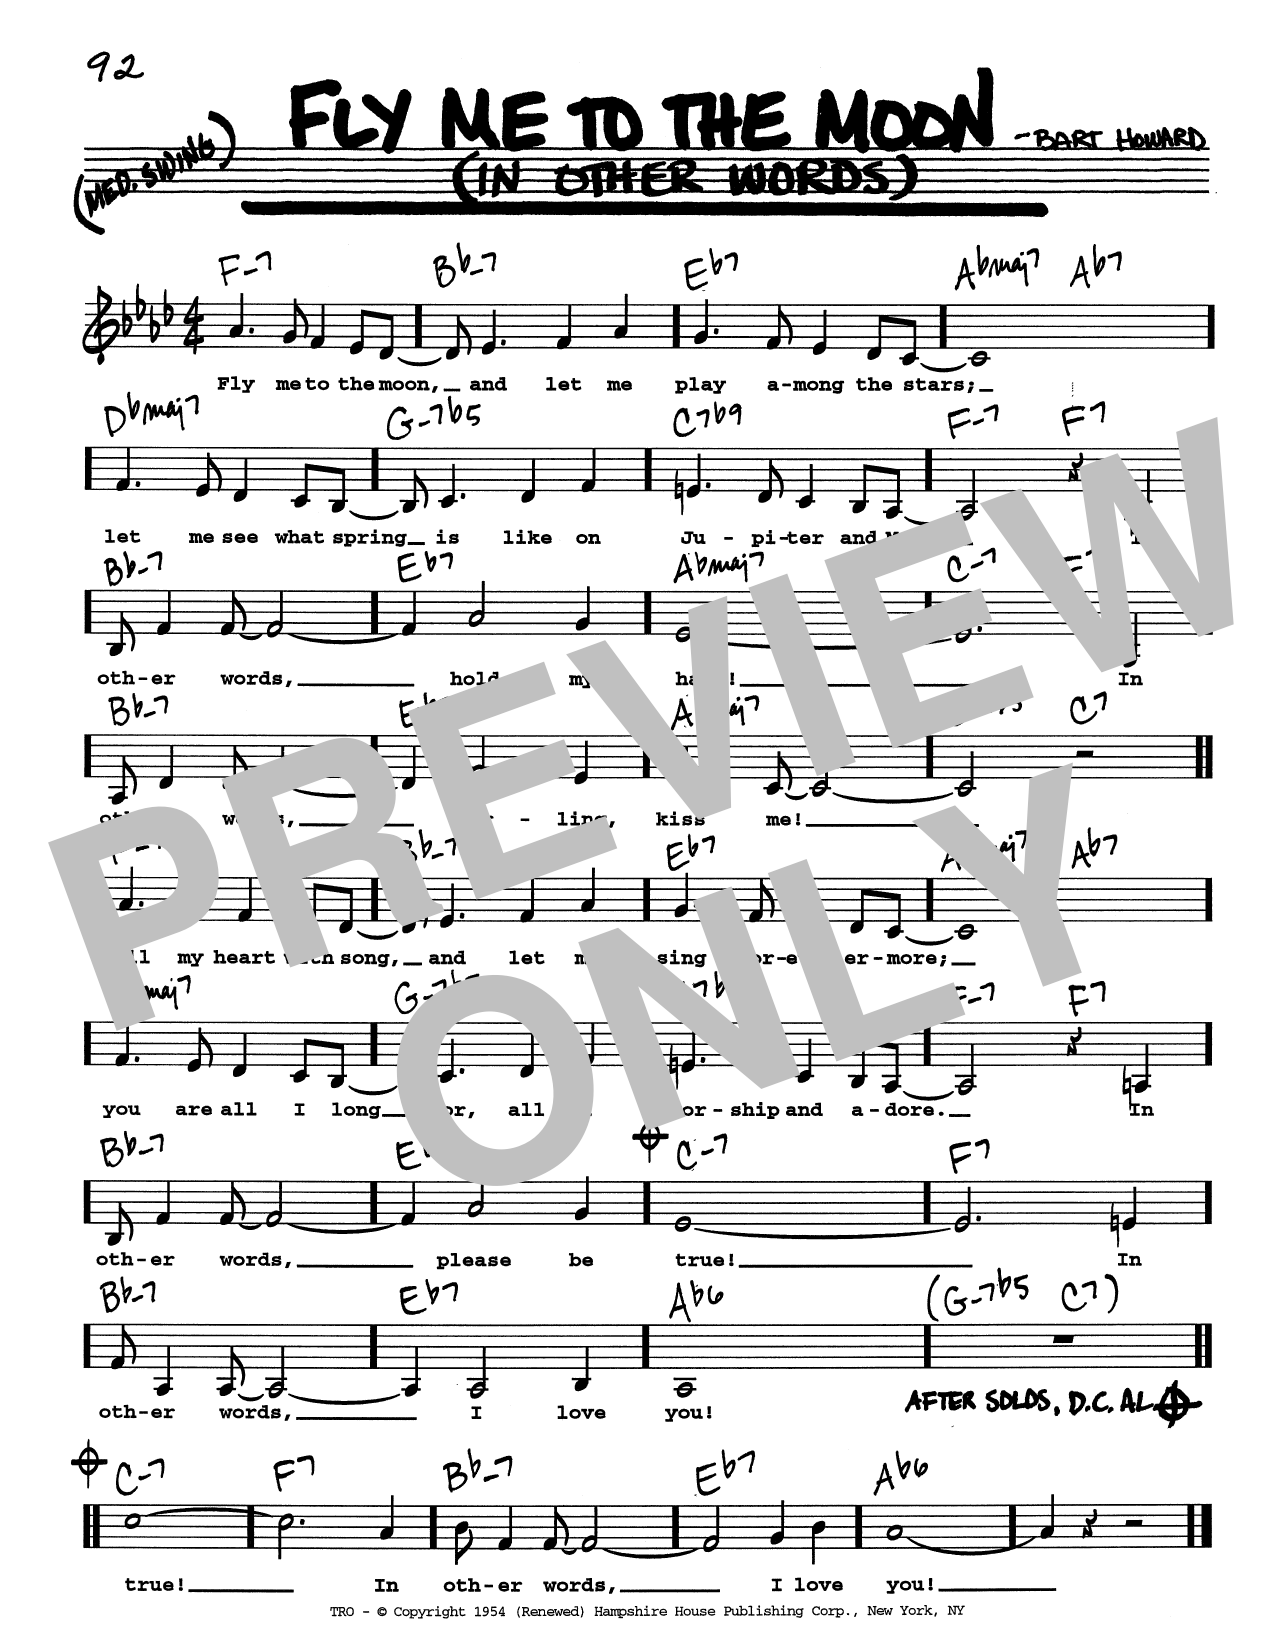 Tony Bennett Fly Me To The Moon (In Other Words) (Low Voice) sheet music notes printable PDF score